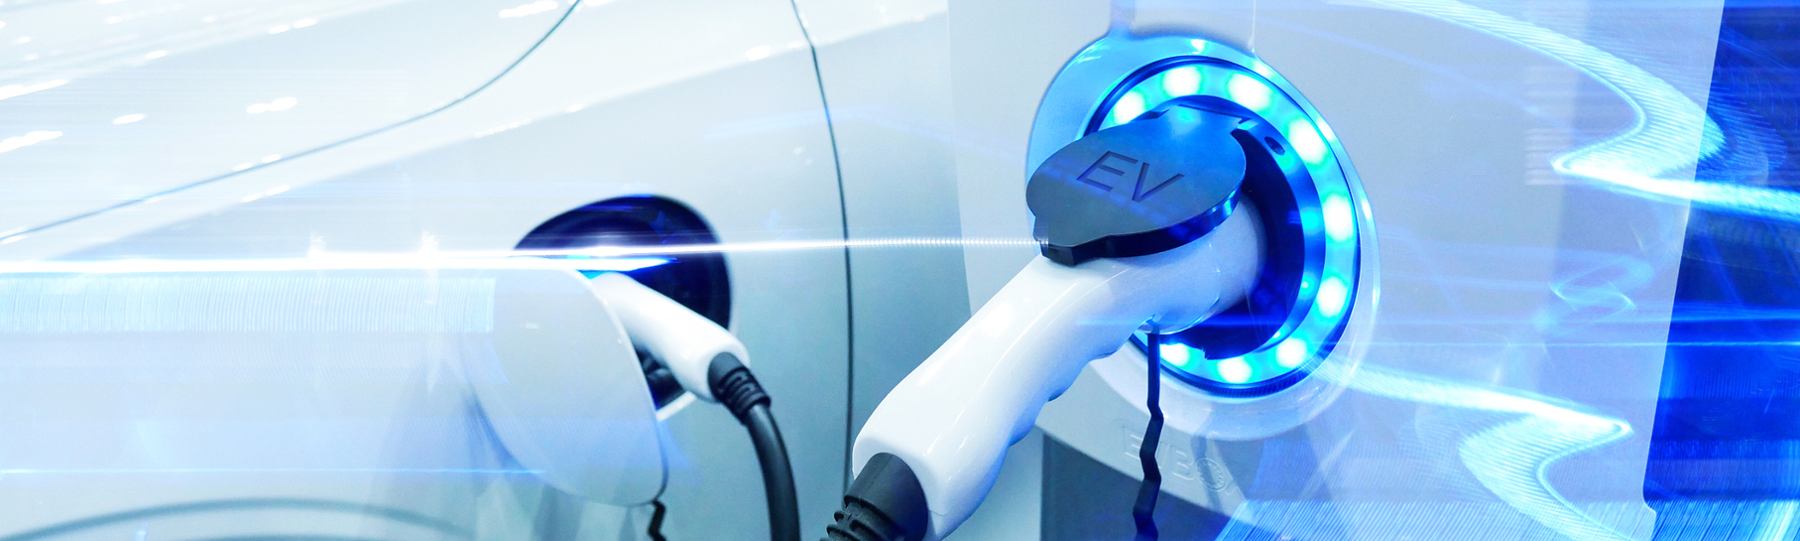 Electric vehicles are the next revolution in automobiles